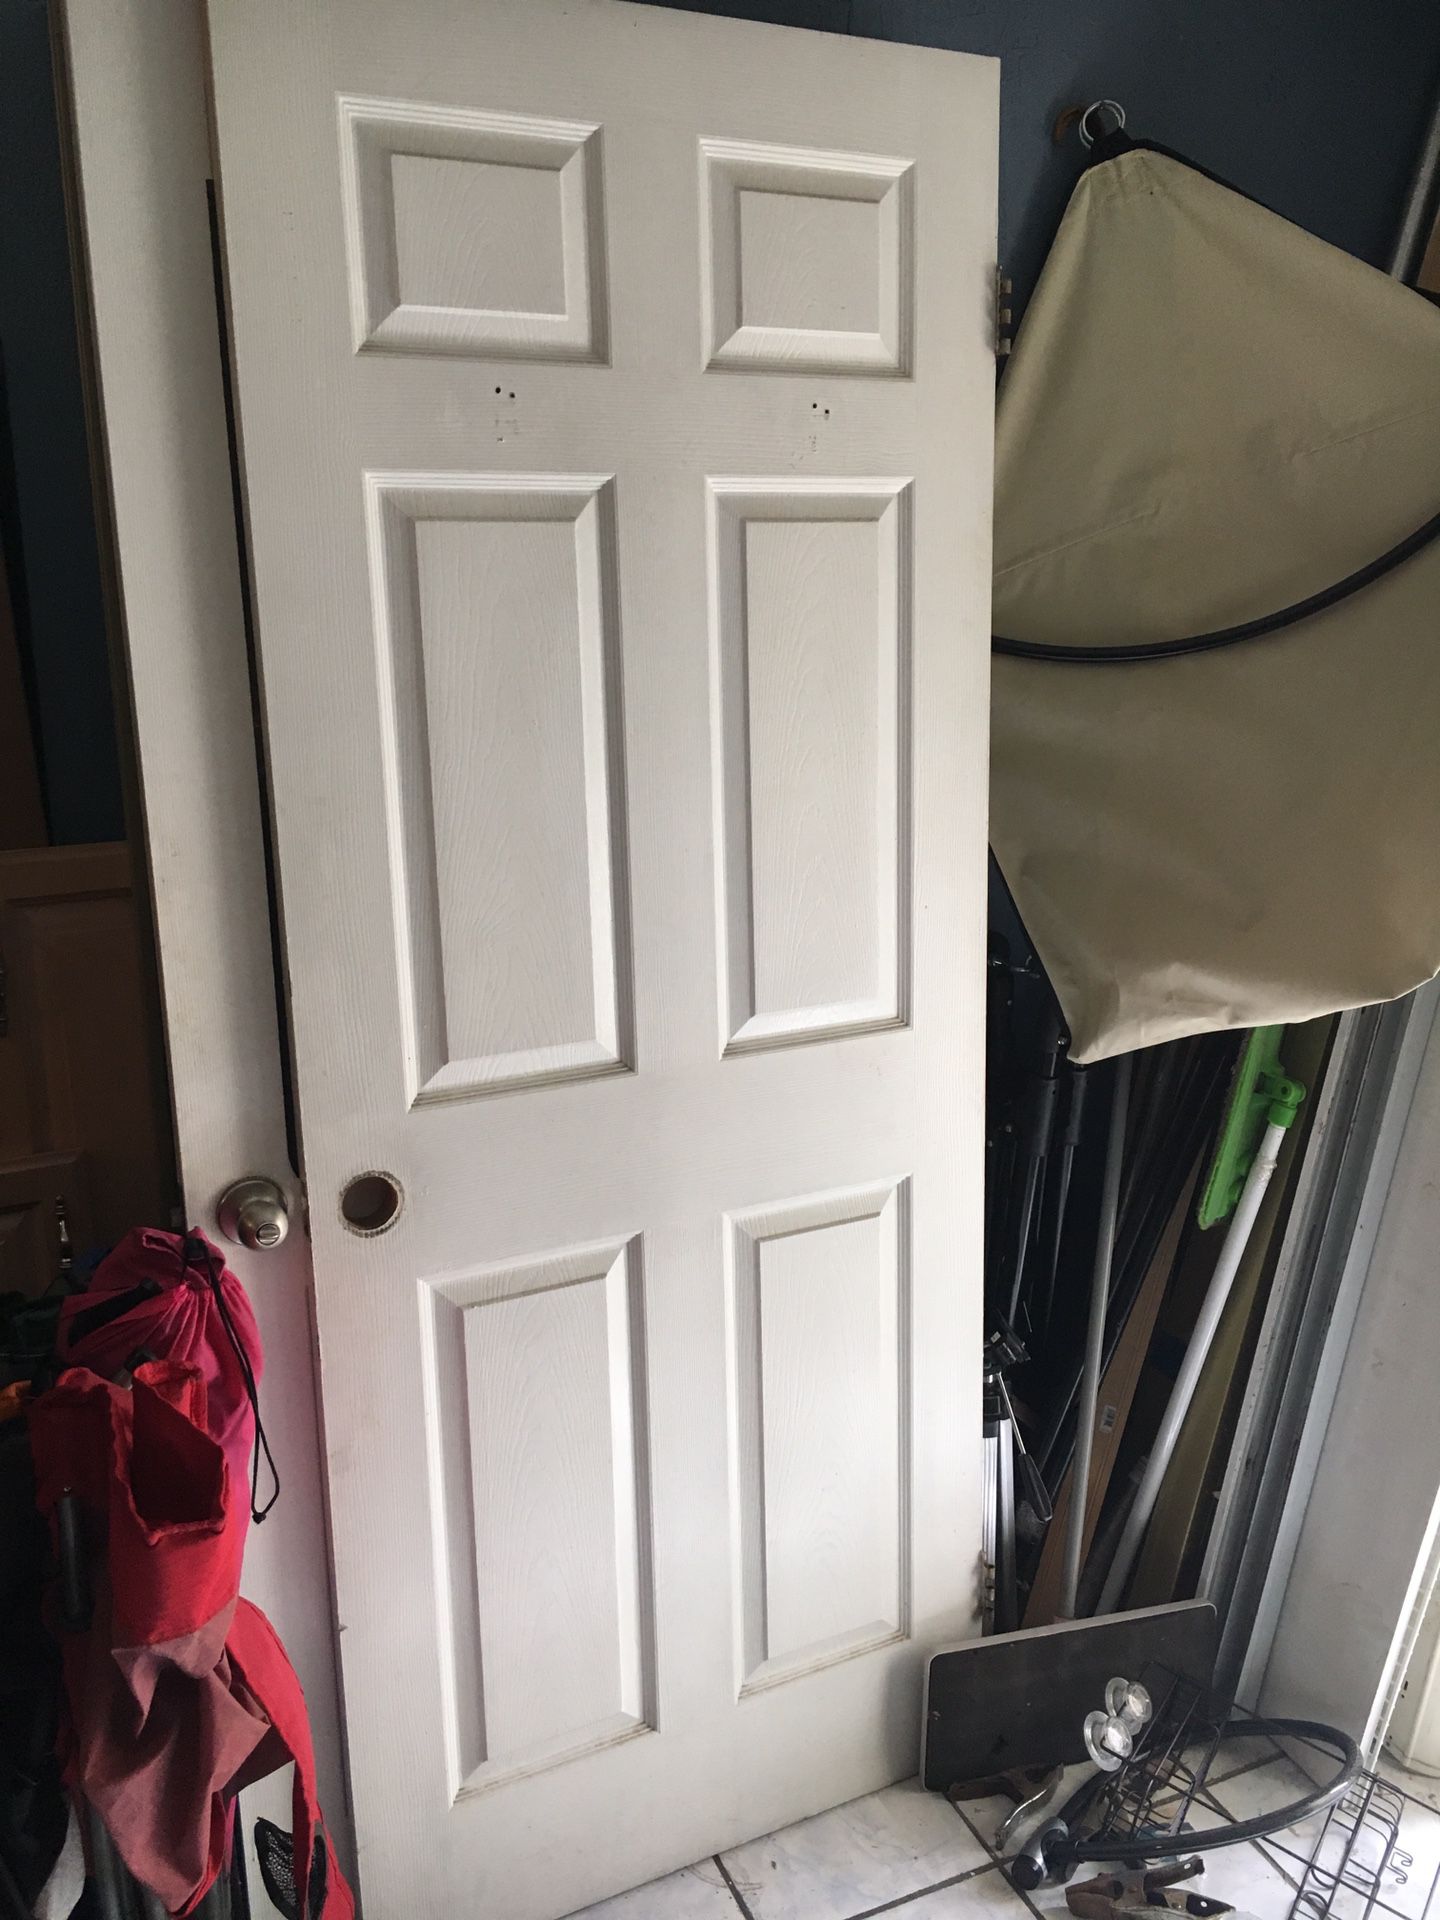 Door Doors for sale. We have two of them. Home Depot sells them for 45 after tax. These are in good condition 27 3/4 inch wide and 79 1/4 inches hei